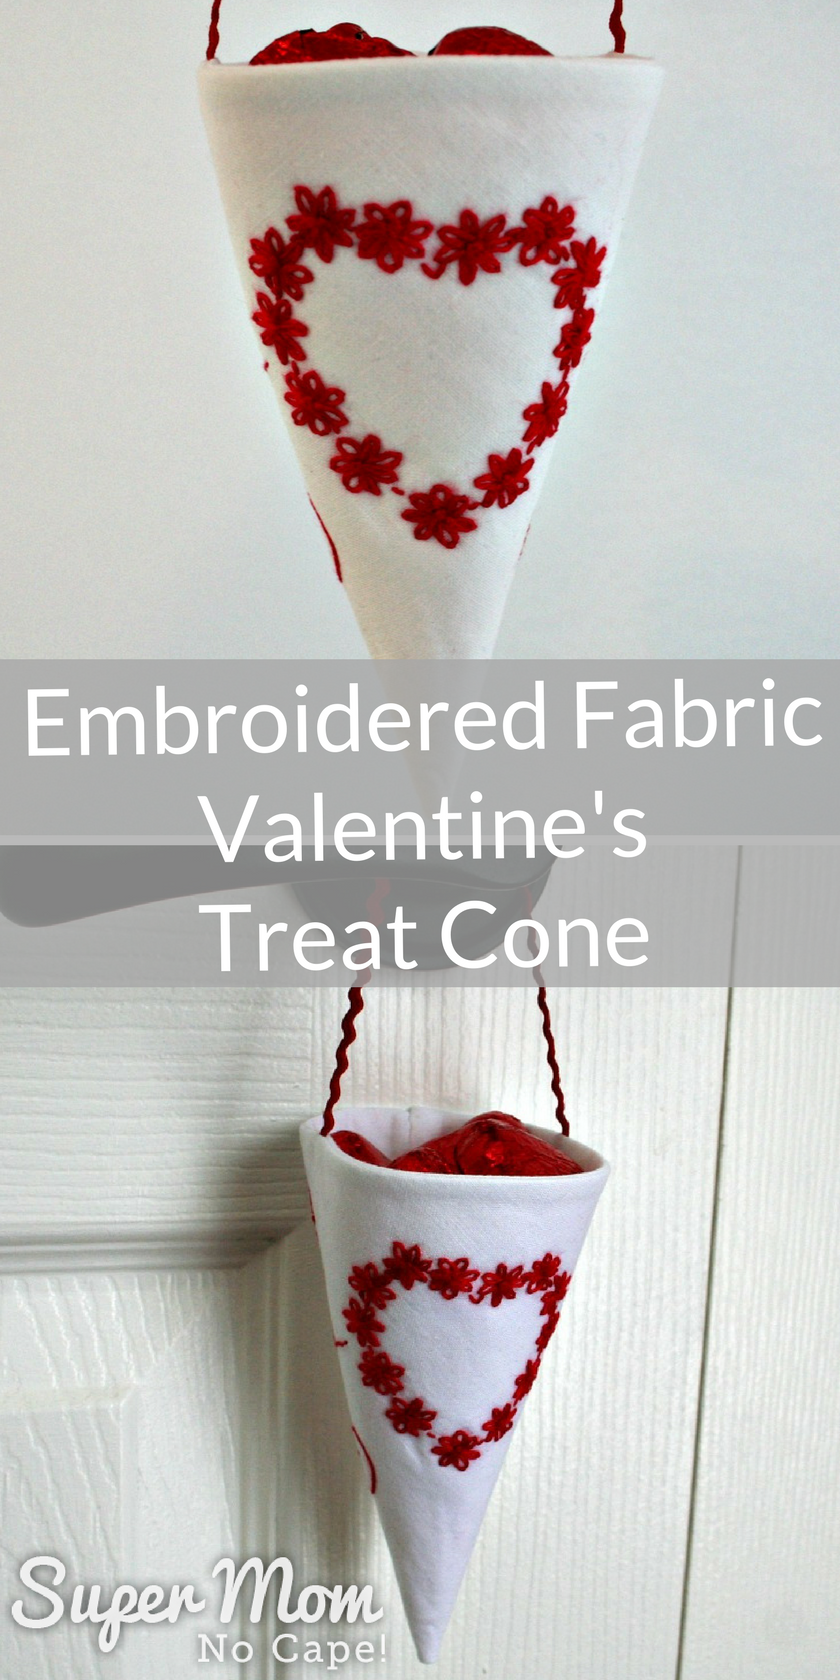 Collage photo of white fabric cone with red embroidered heart